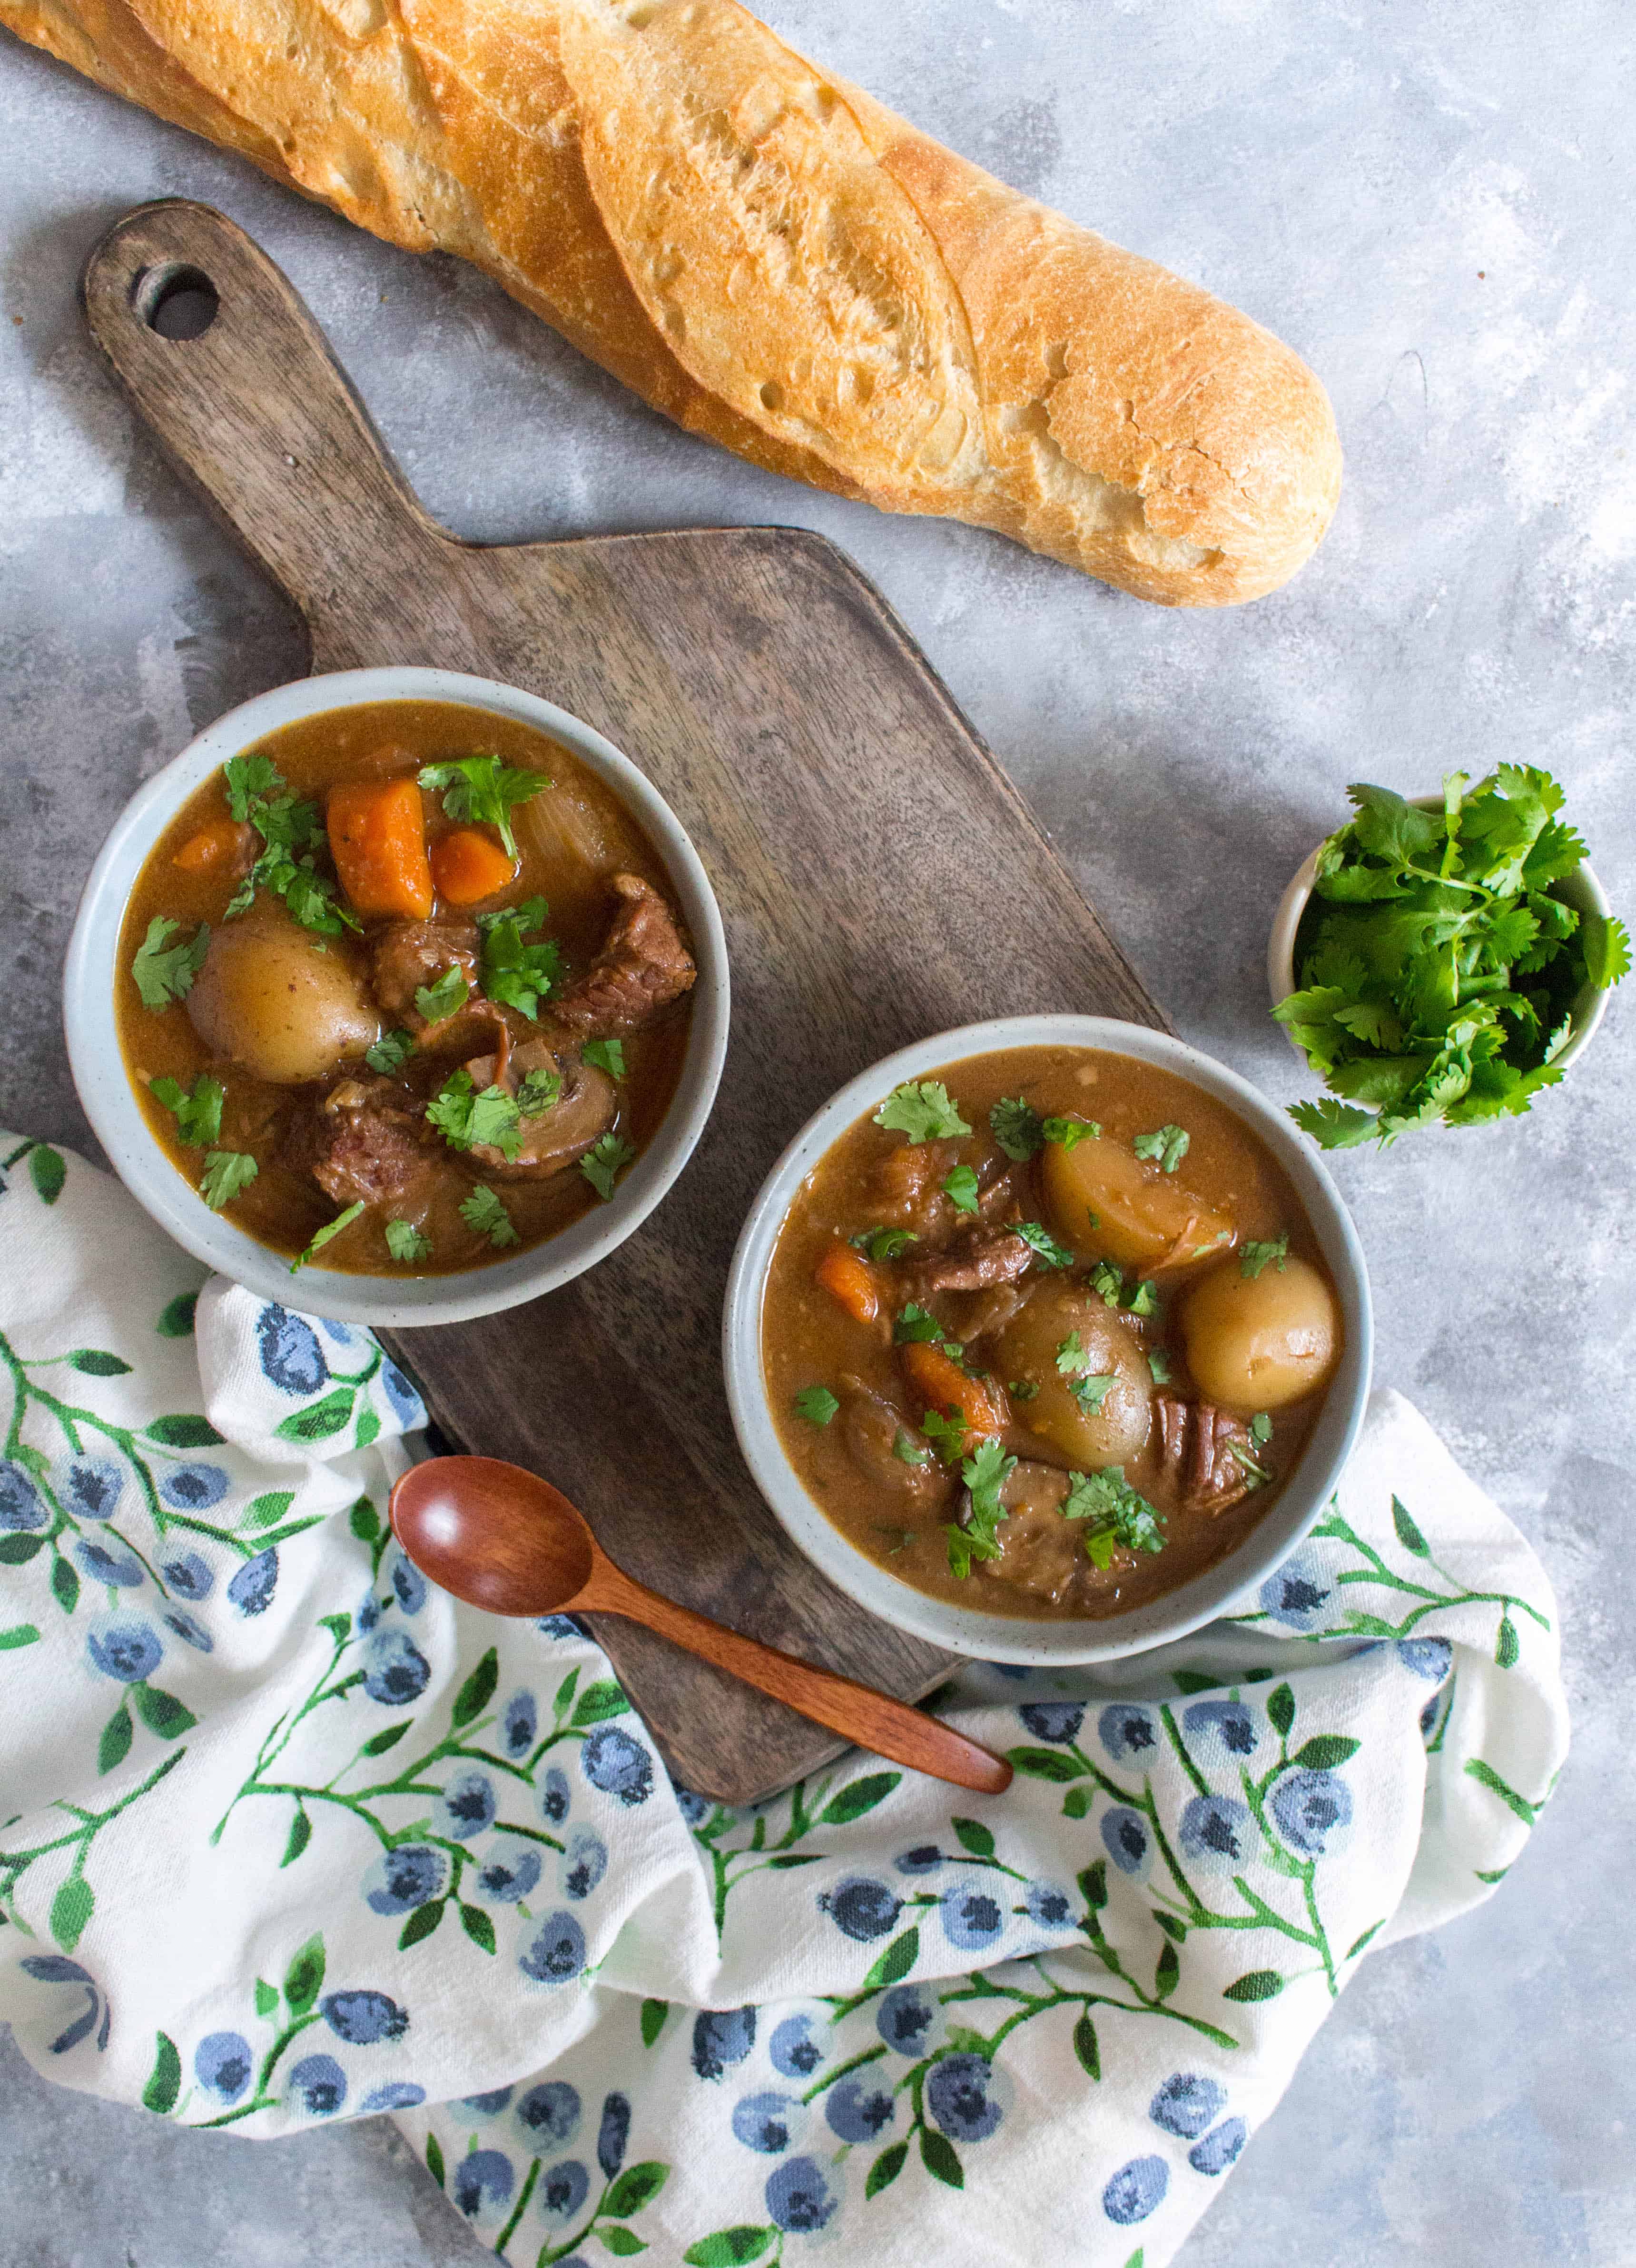 This super Easy Instant Pot Beef Stew will have you grabbing a second bowl! A thick and rich sauce filled with hearty potatoes, carrots, onions, and melt in your mouth beef that will only take under an hour with an Instant Pot! #instantpotrecipes #easyinstantpotrecipes #beefstewrecipes